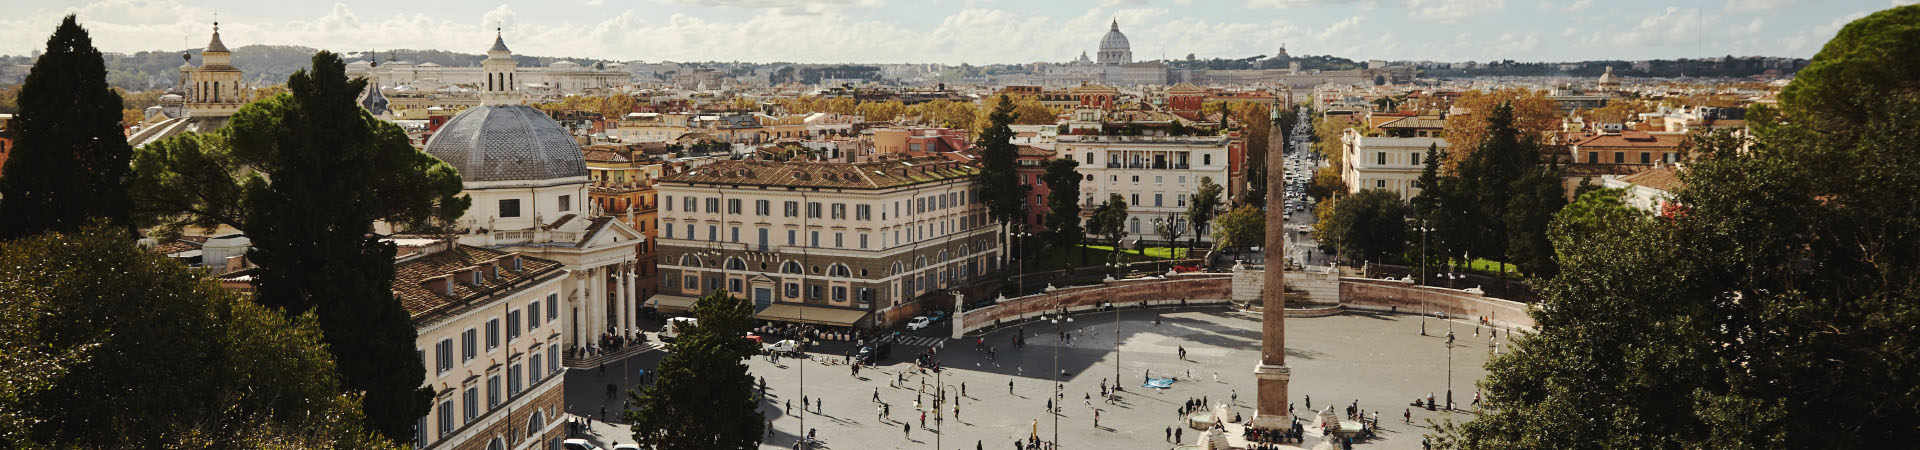 Study Abroad in Italy | Spend a Semester in Rome